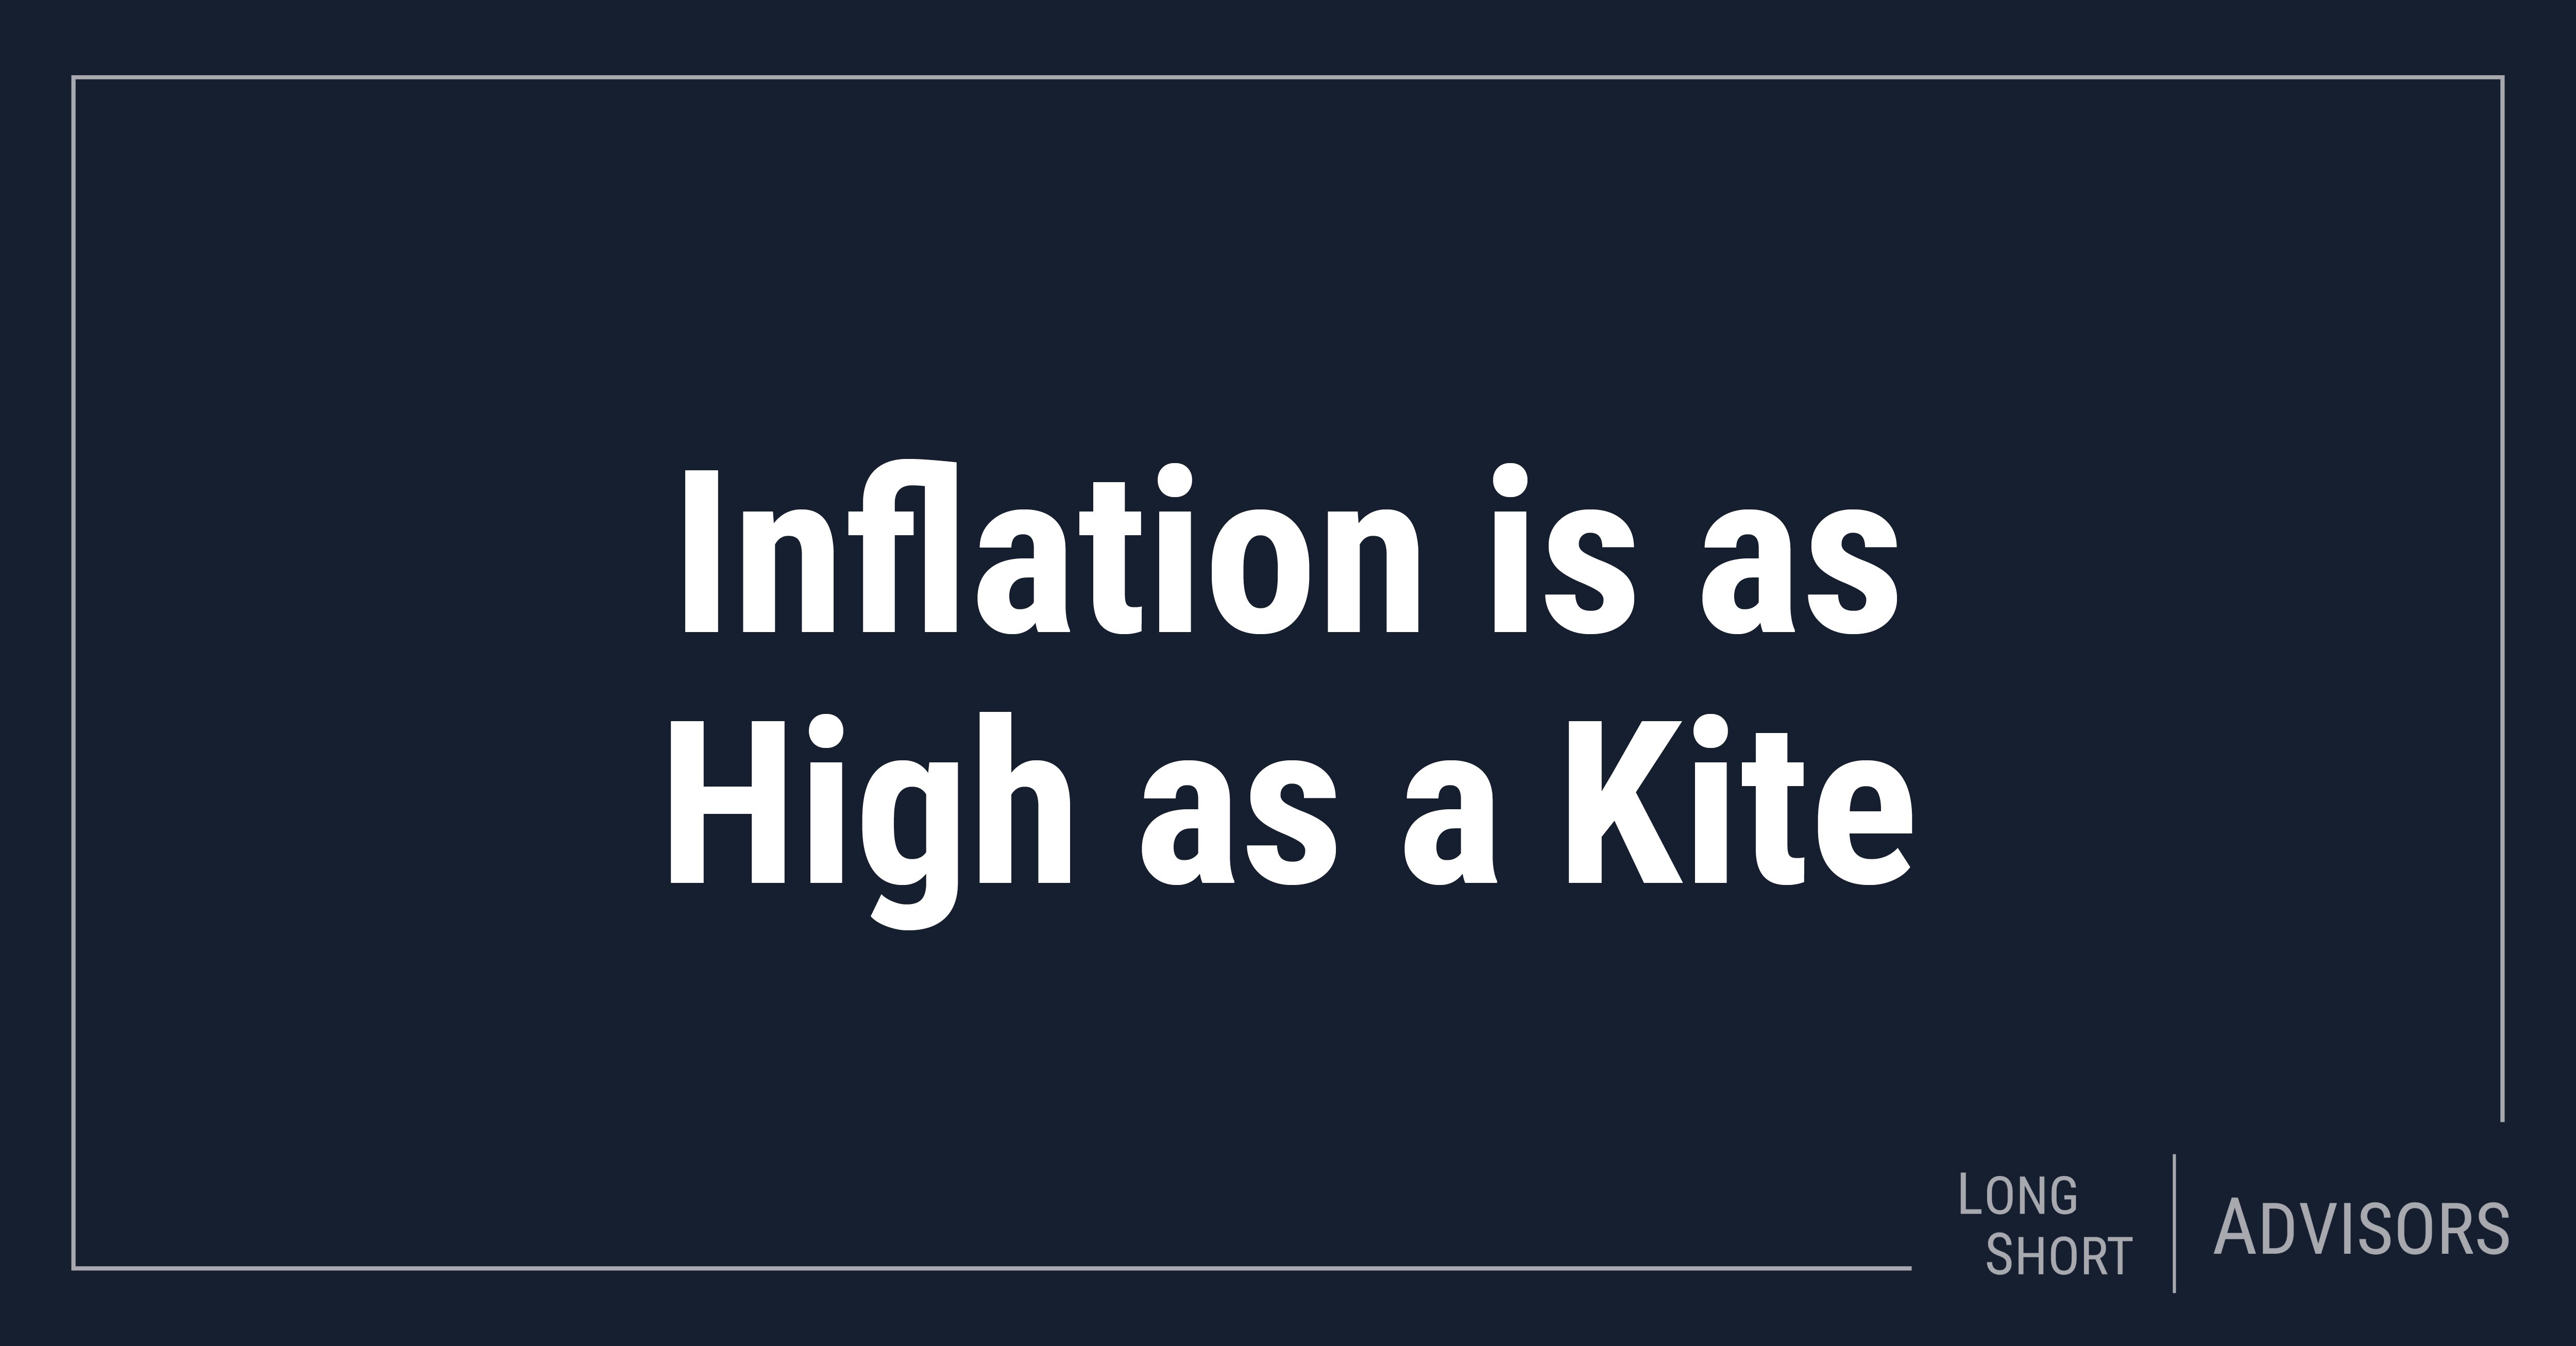 Inflation is as High as a Kite